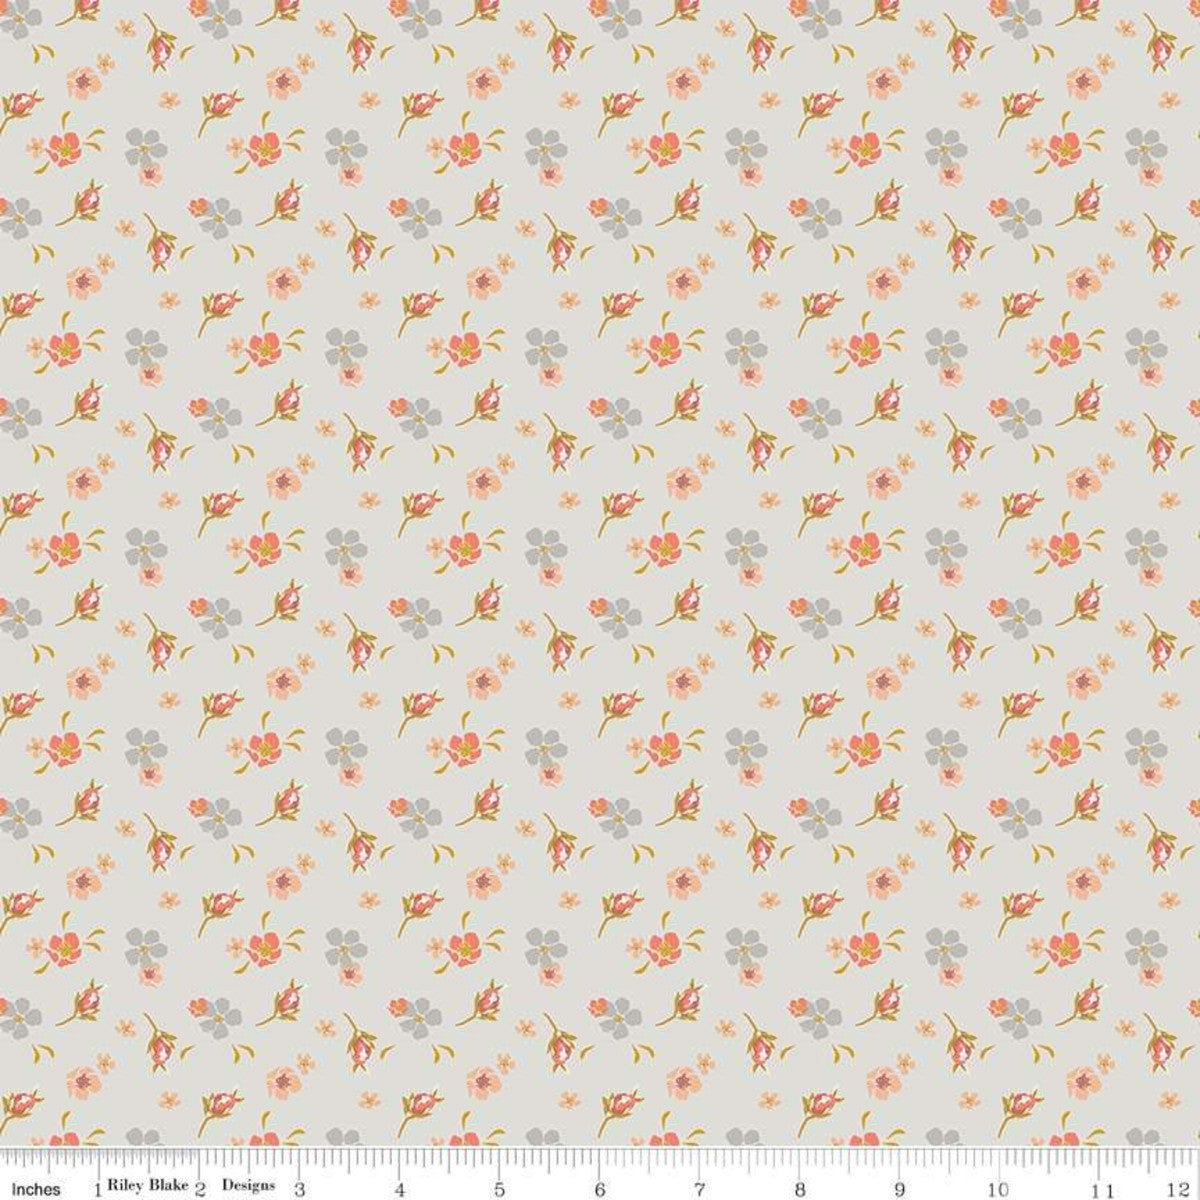 PREORDER Hello Words Fabric SHIPS AugSept 2019 Golden Days by Fancy Pants Designs for Riley Blake Golden Days Hello Coral